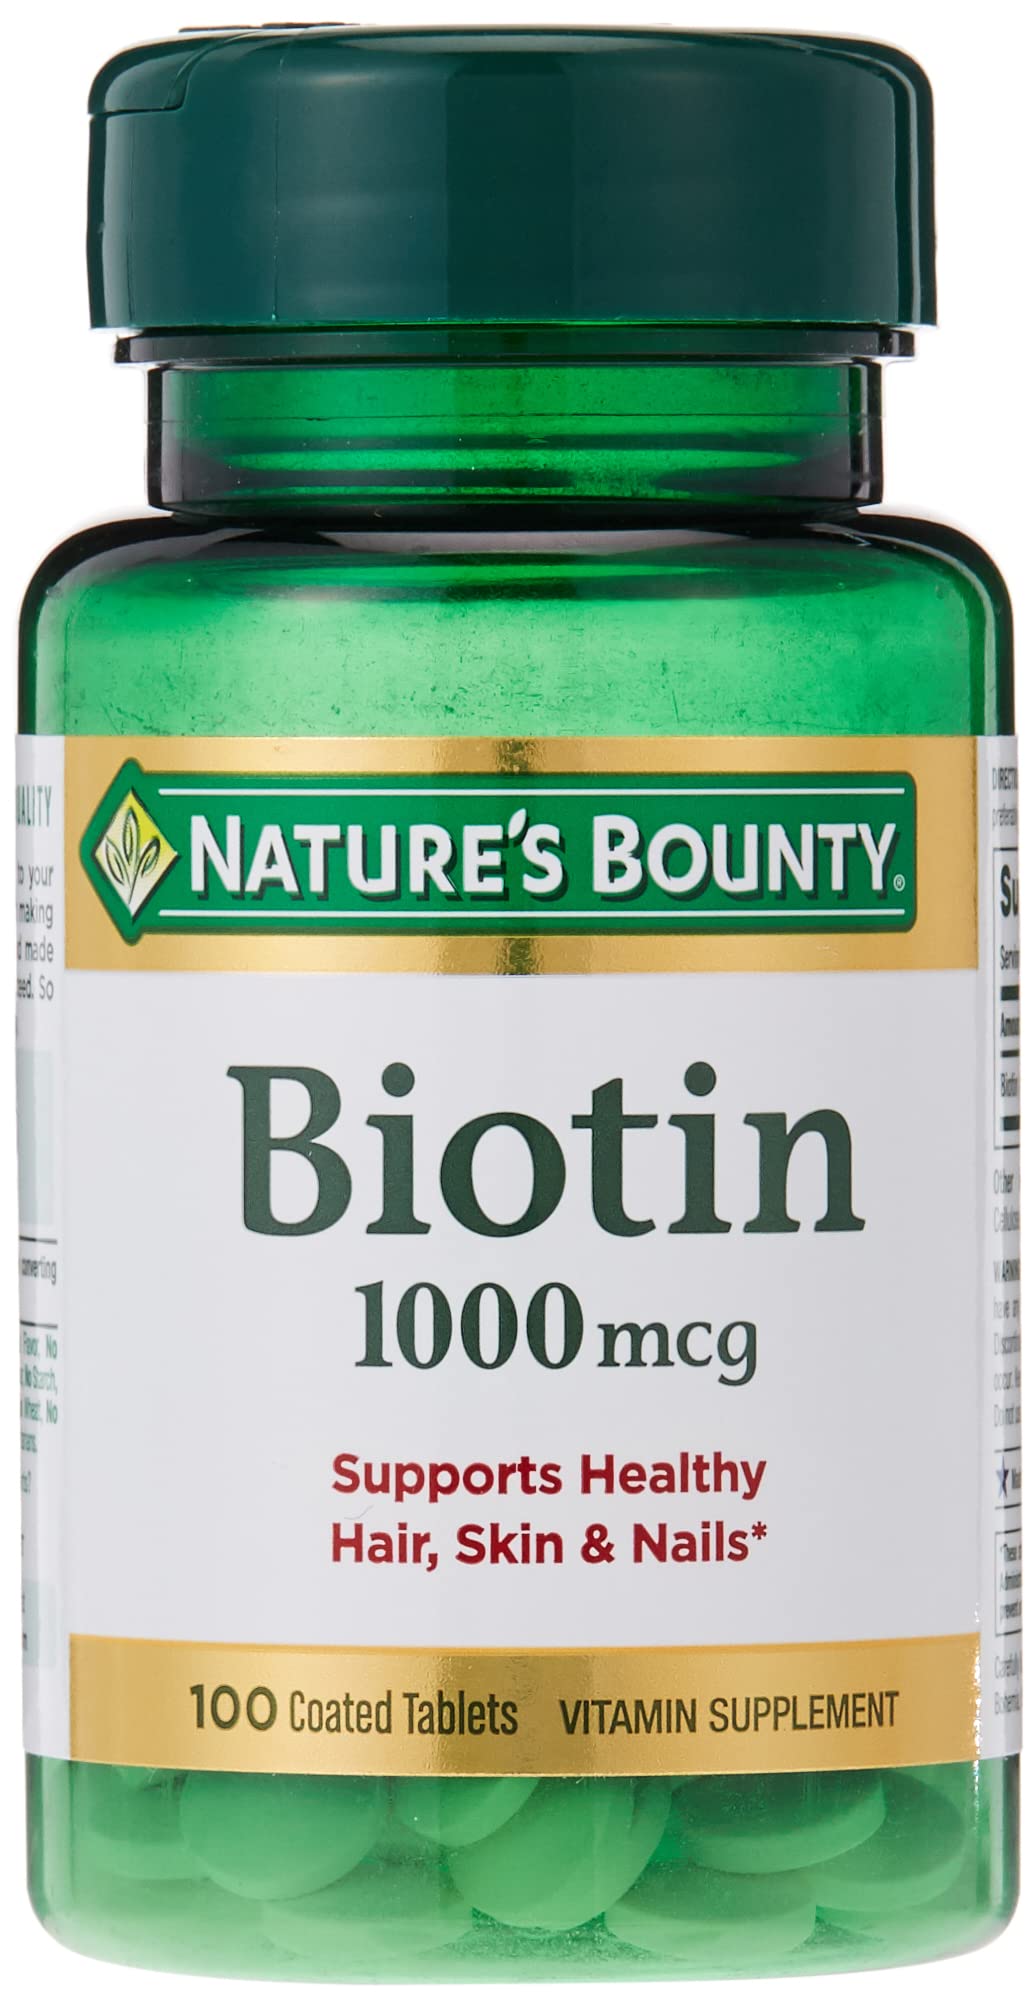 Biotin by Nature's Bounty, Vitamin Supplement, Supports Metabolism for Cellular Energy and Healthy Hair, Skin, and Nails, 1000 mcg, 100 Tablets